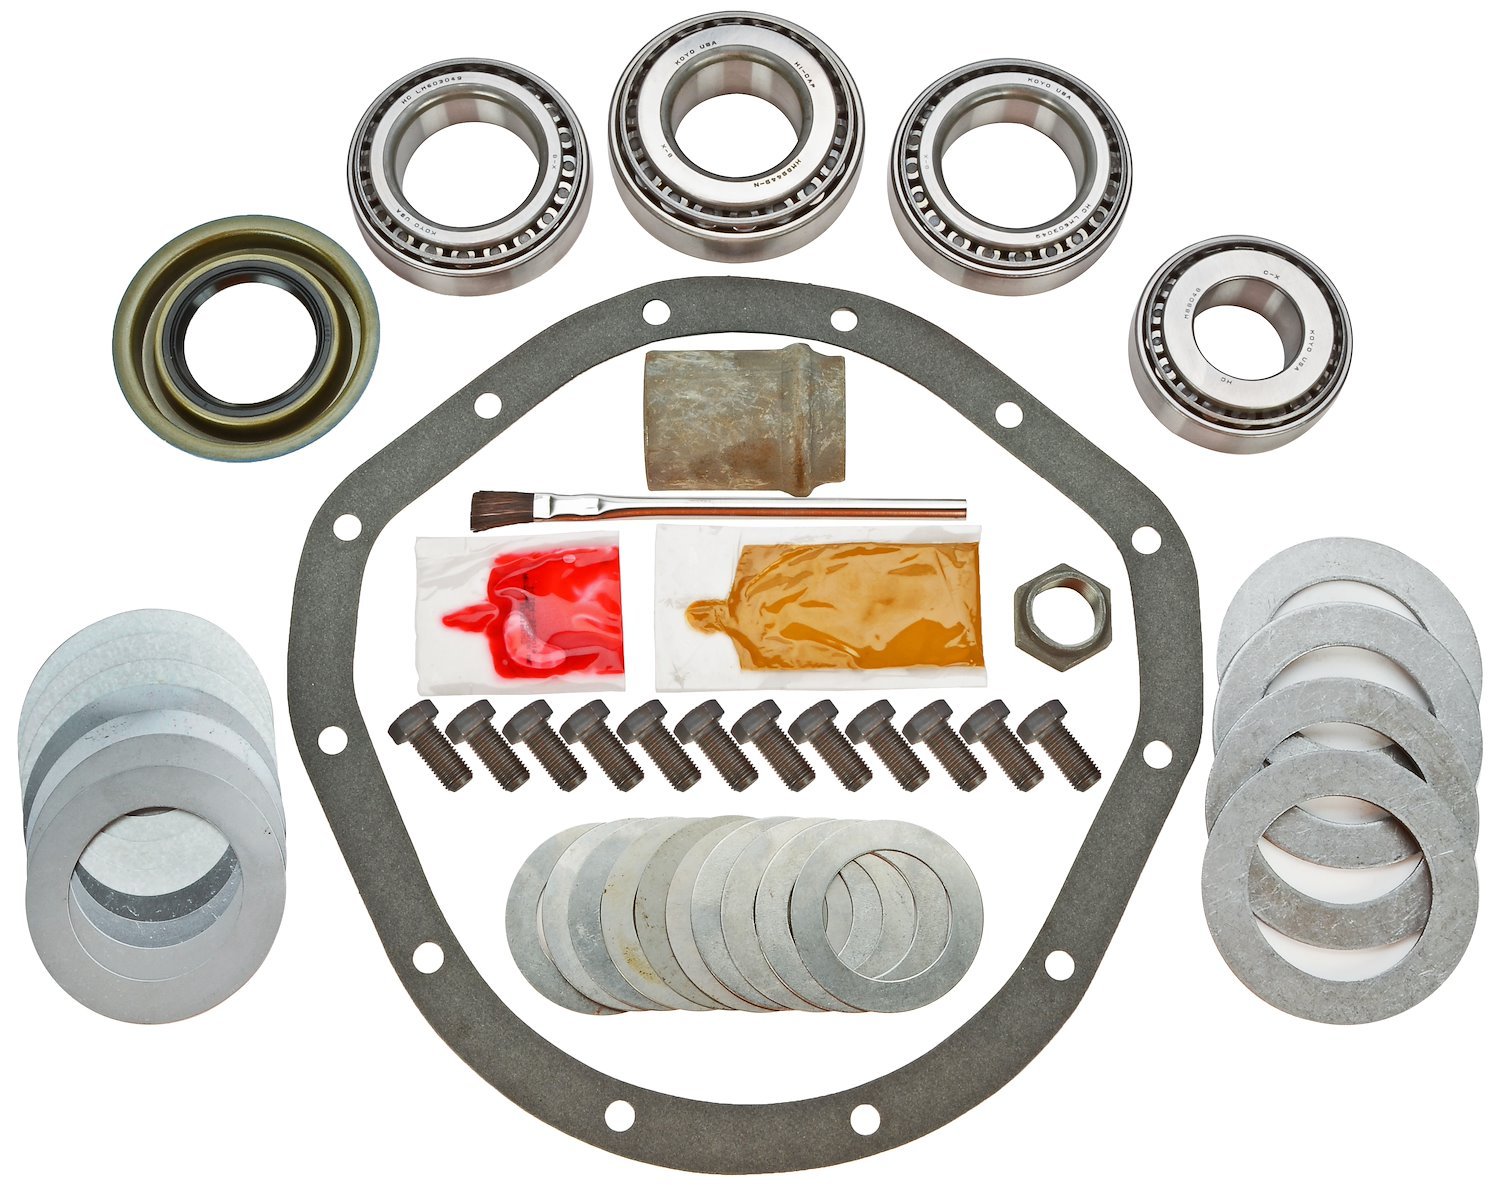 Complete Differential Installation Kit for GM 8.875 in. (12-Bolt) Truck